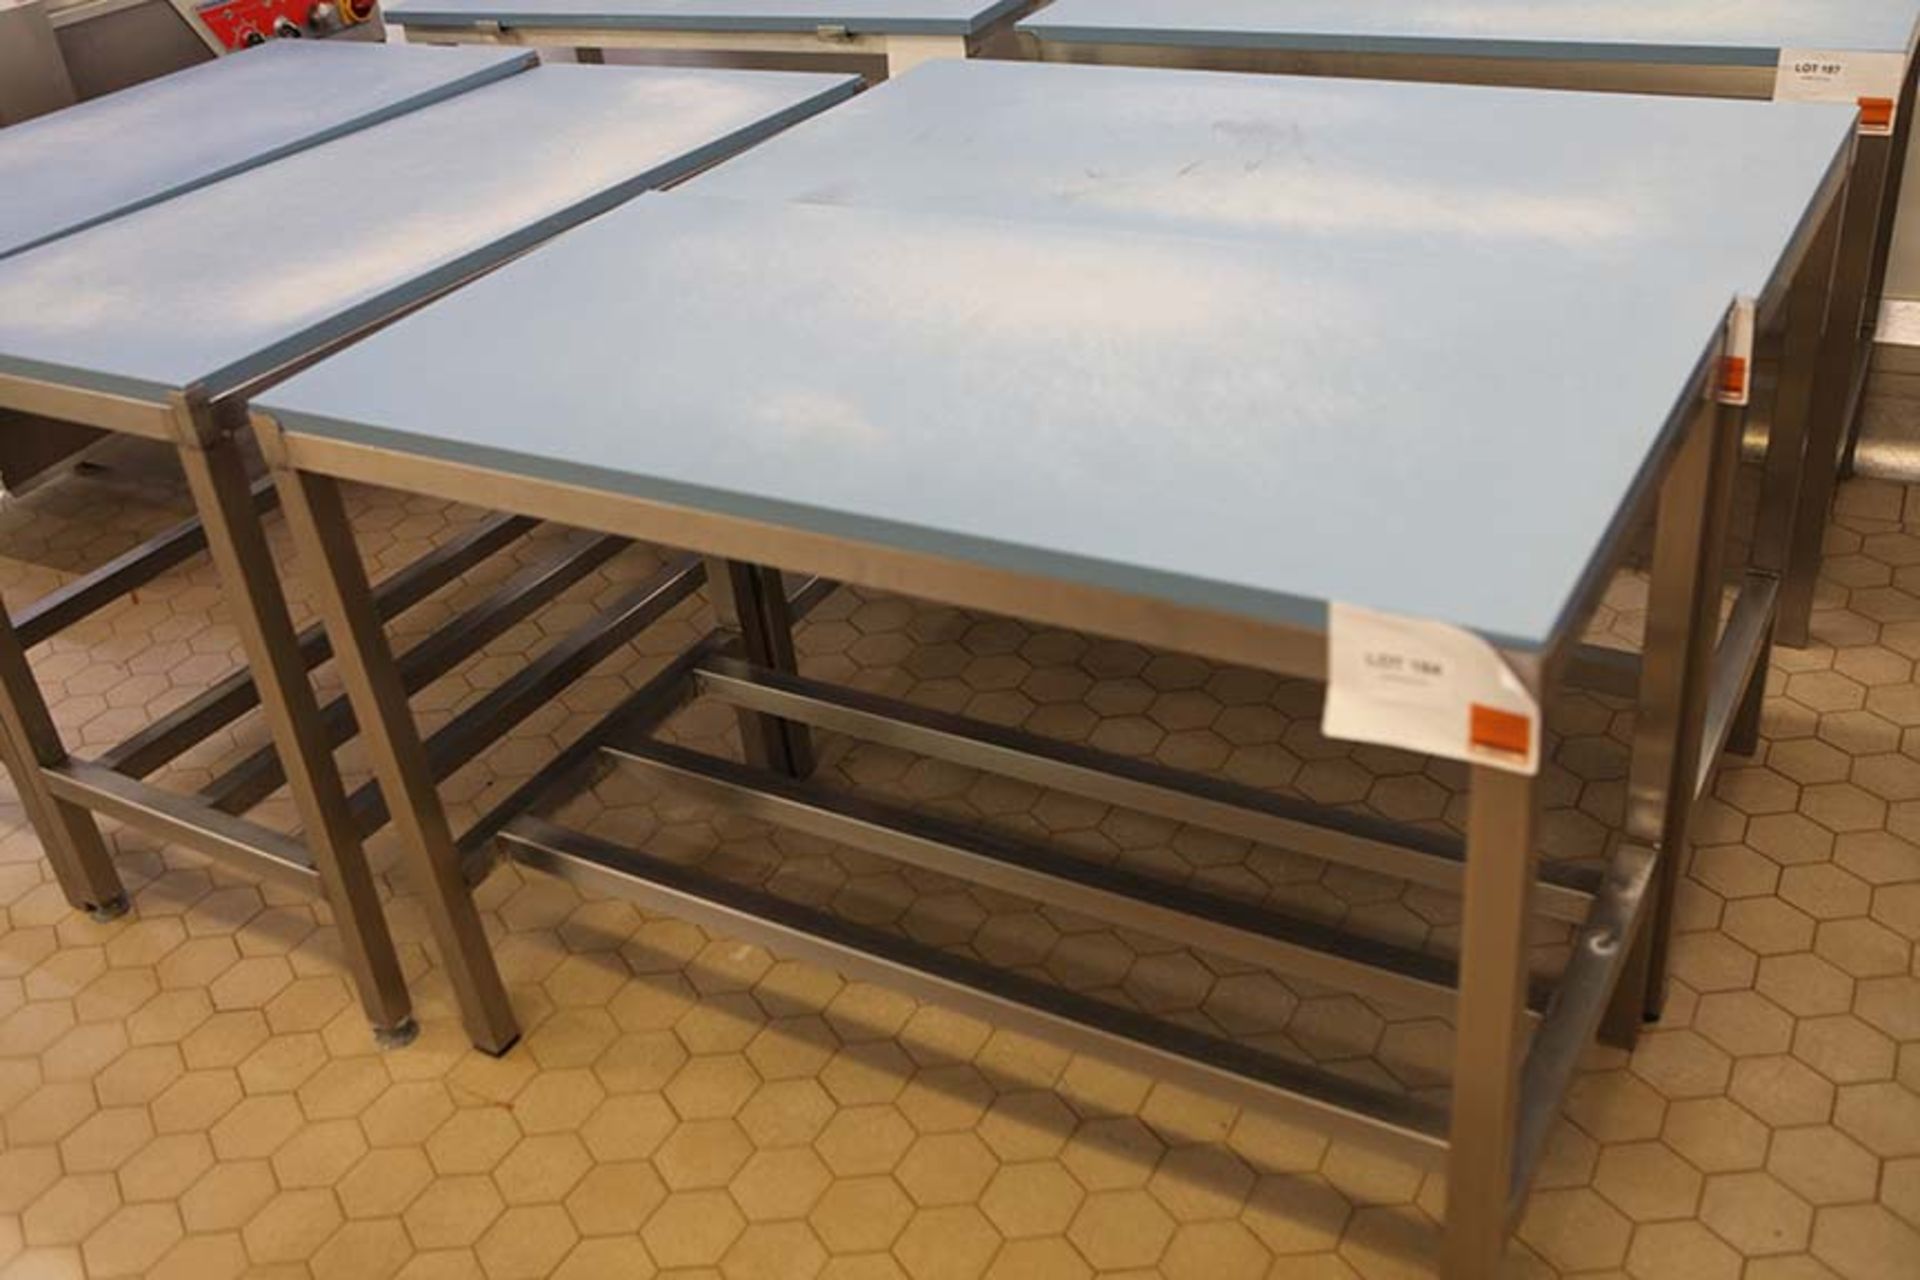 2 Meat preparation tables with Blue tops 1200 x 600 mm